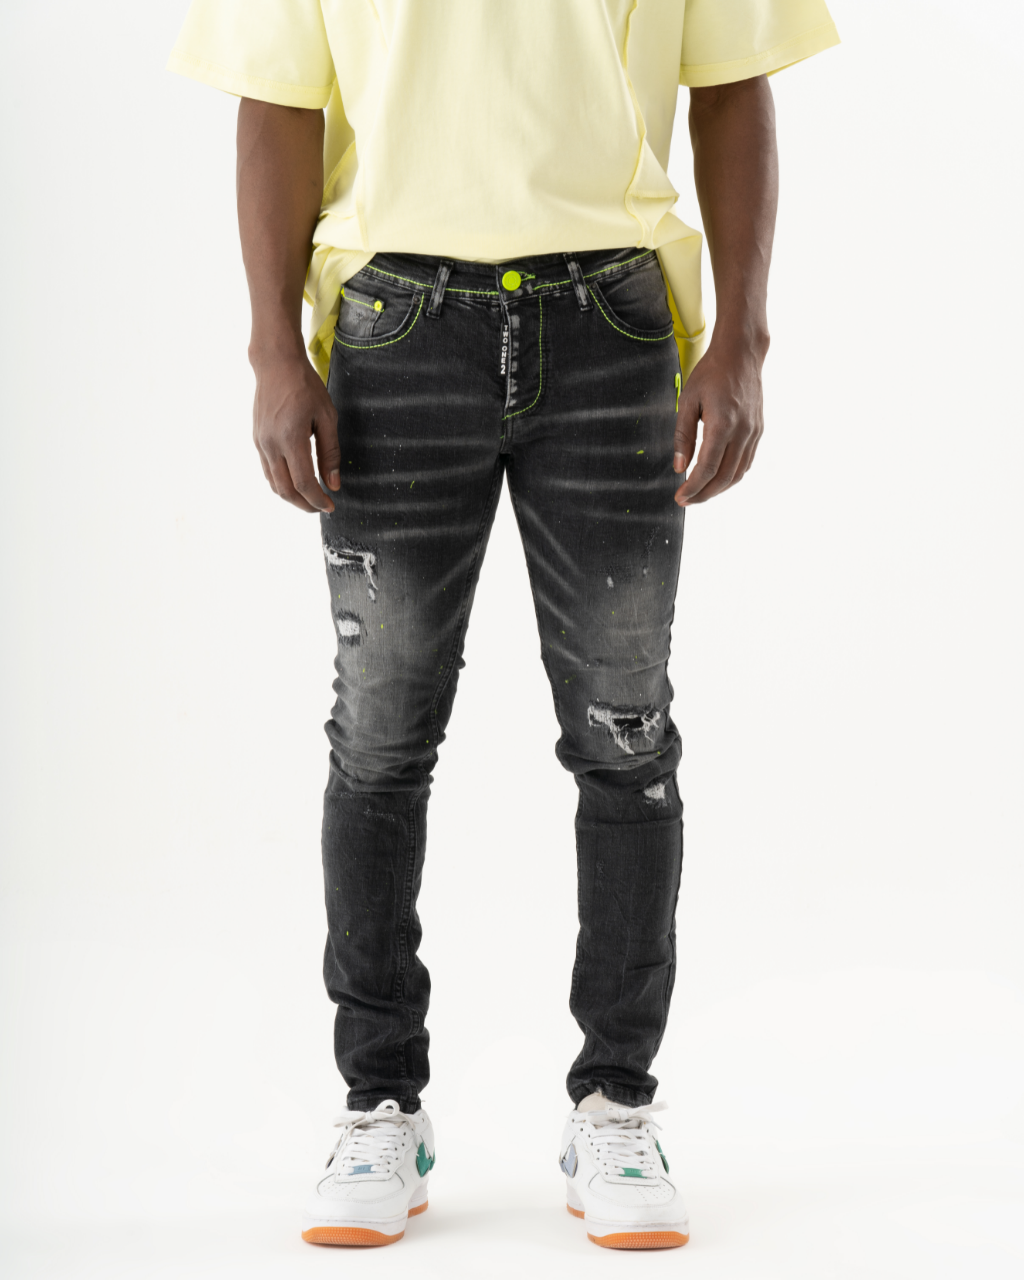 A man wearing INKLING skinny fit black jeans and a yellow t - shirt.